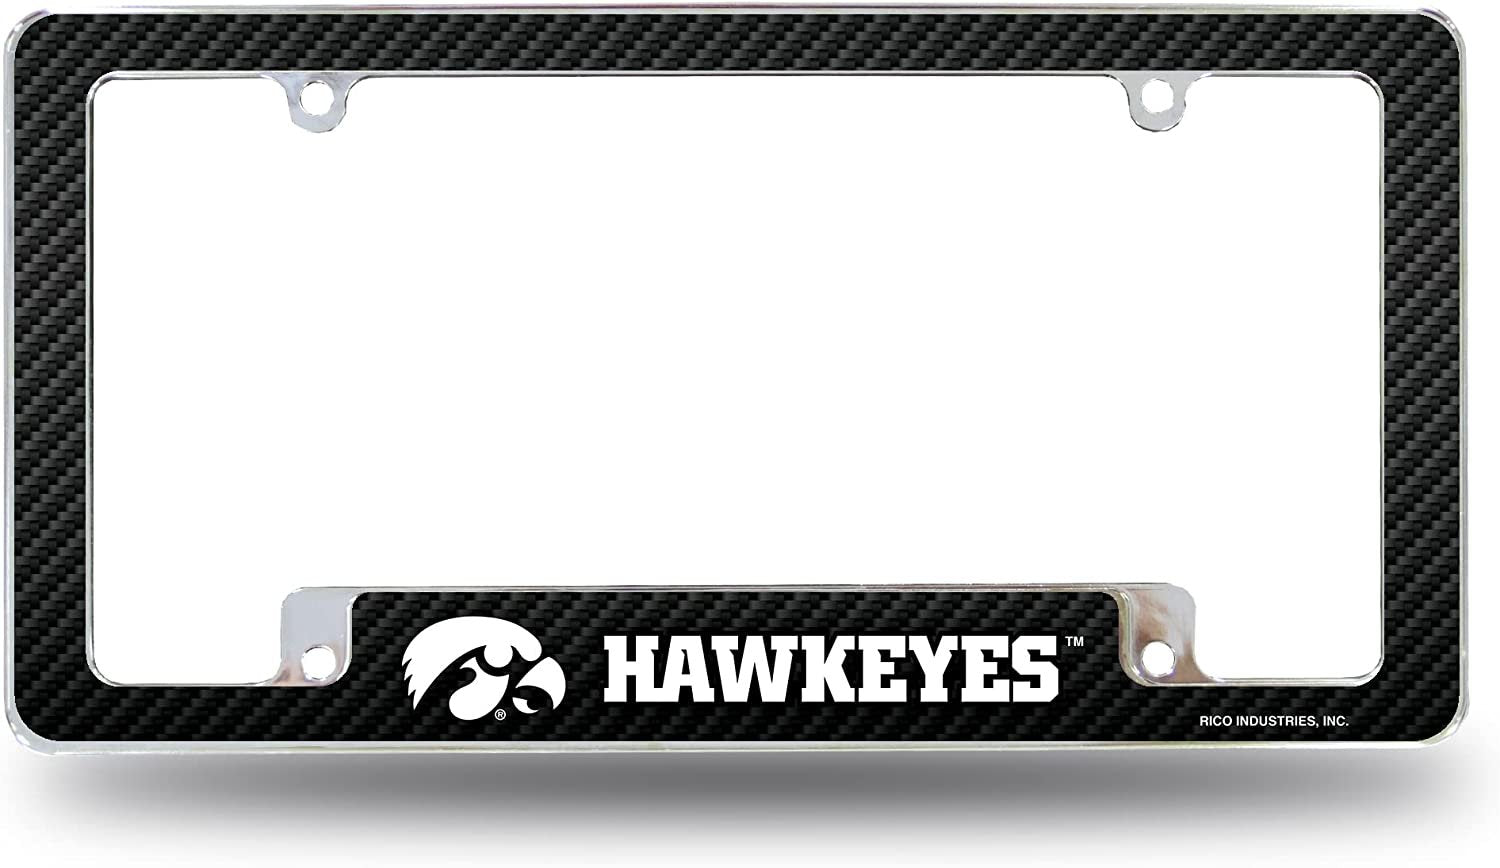 University of Iowa Hawkeyes Metal License Plate Frame Chrome Tag Cover 12x6 Inch Carbon Fiber Design